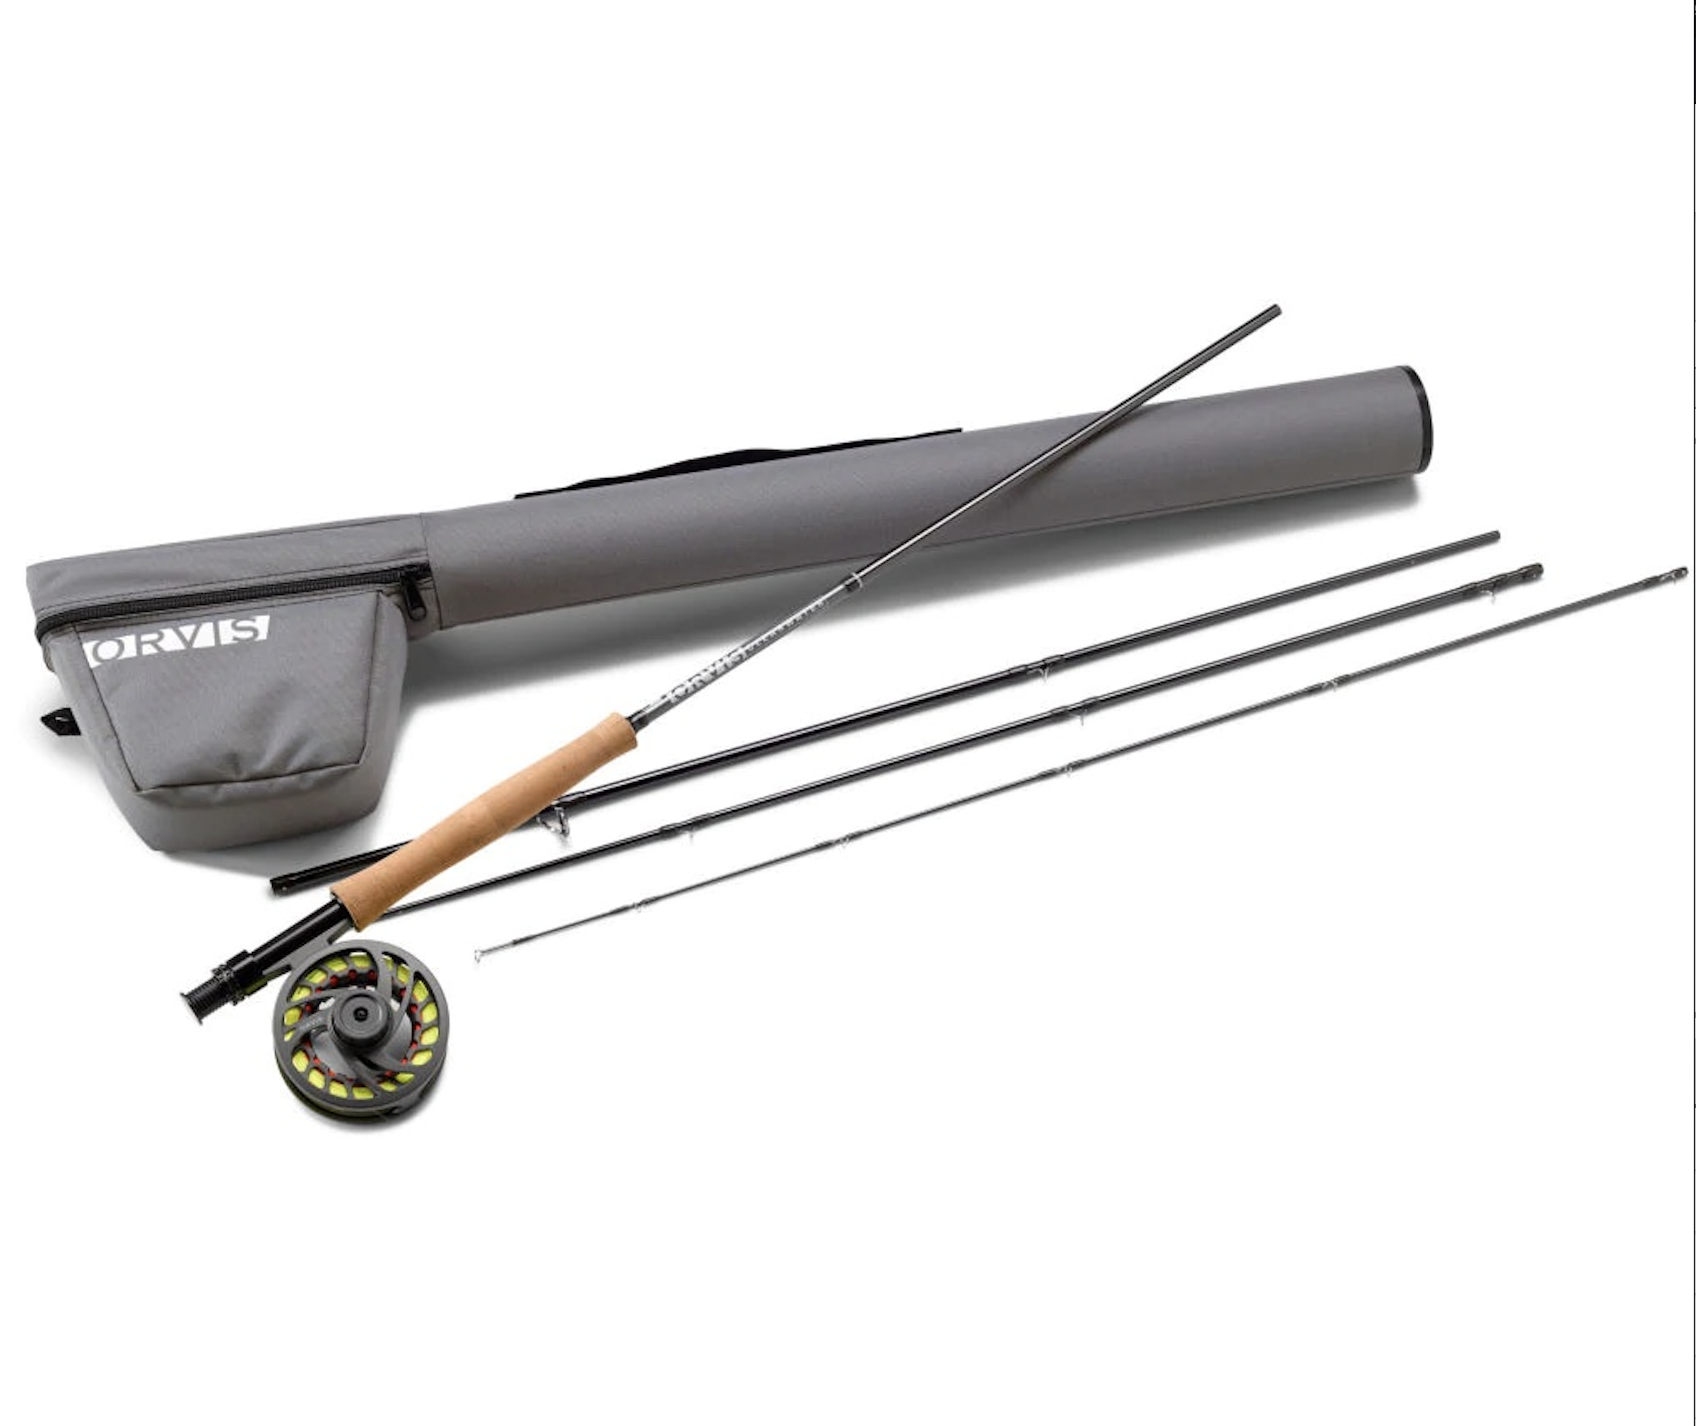 Orvis Clearwater Outfit 905-4 - Royal Gorge Anglers